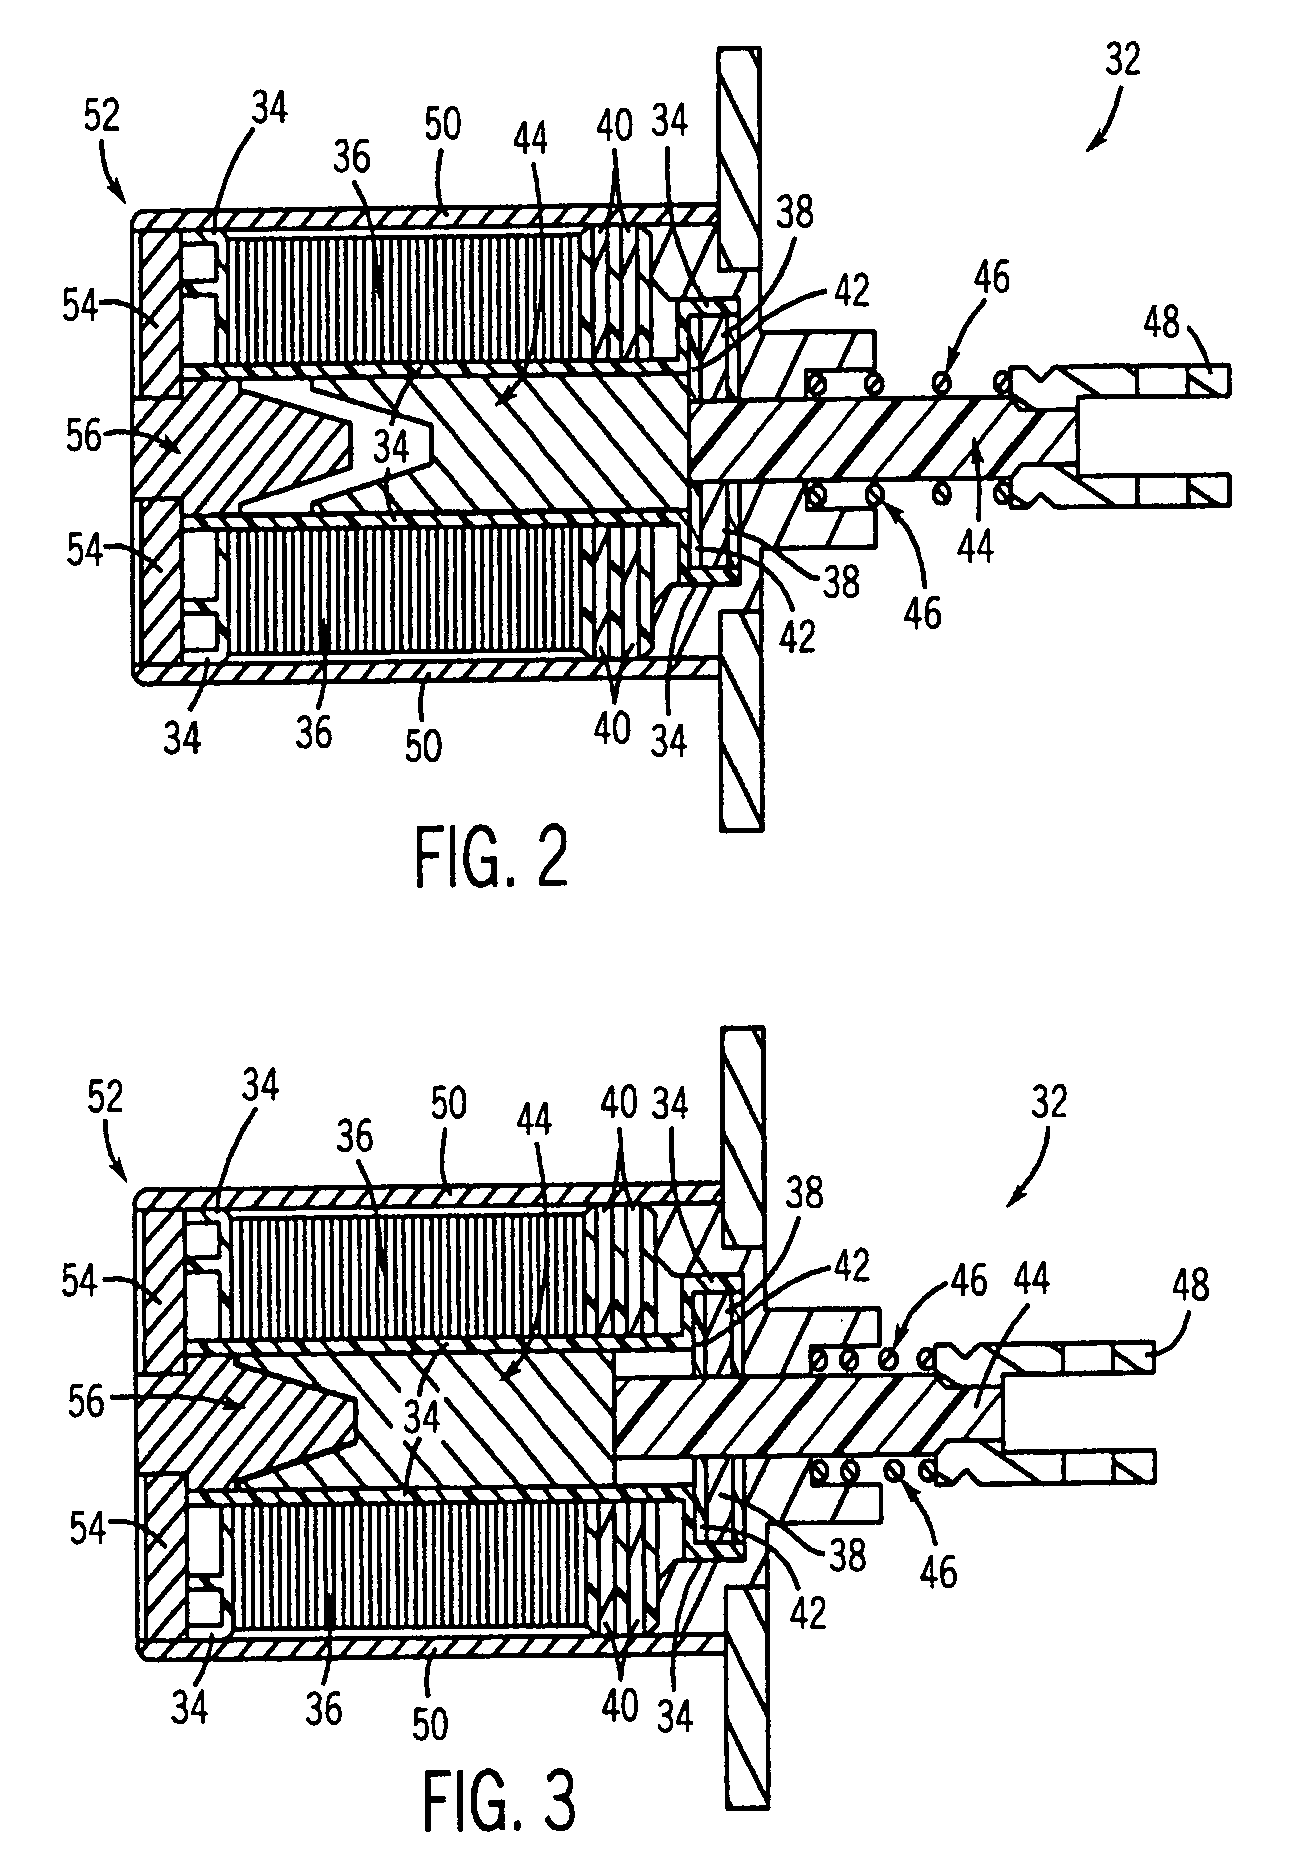 Single coil solenoid having a permanent magnet with bi-directional assist